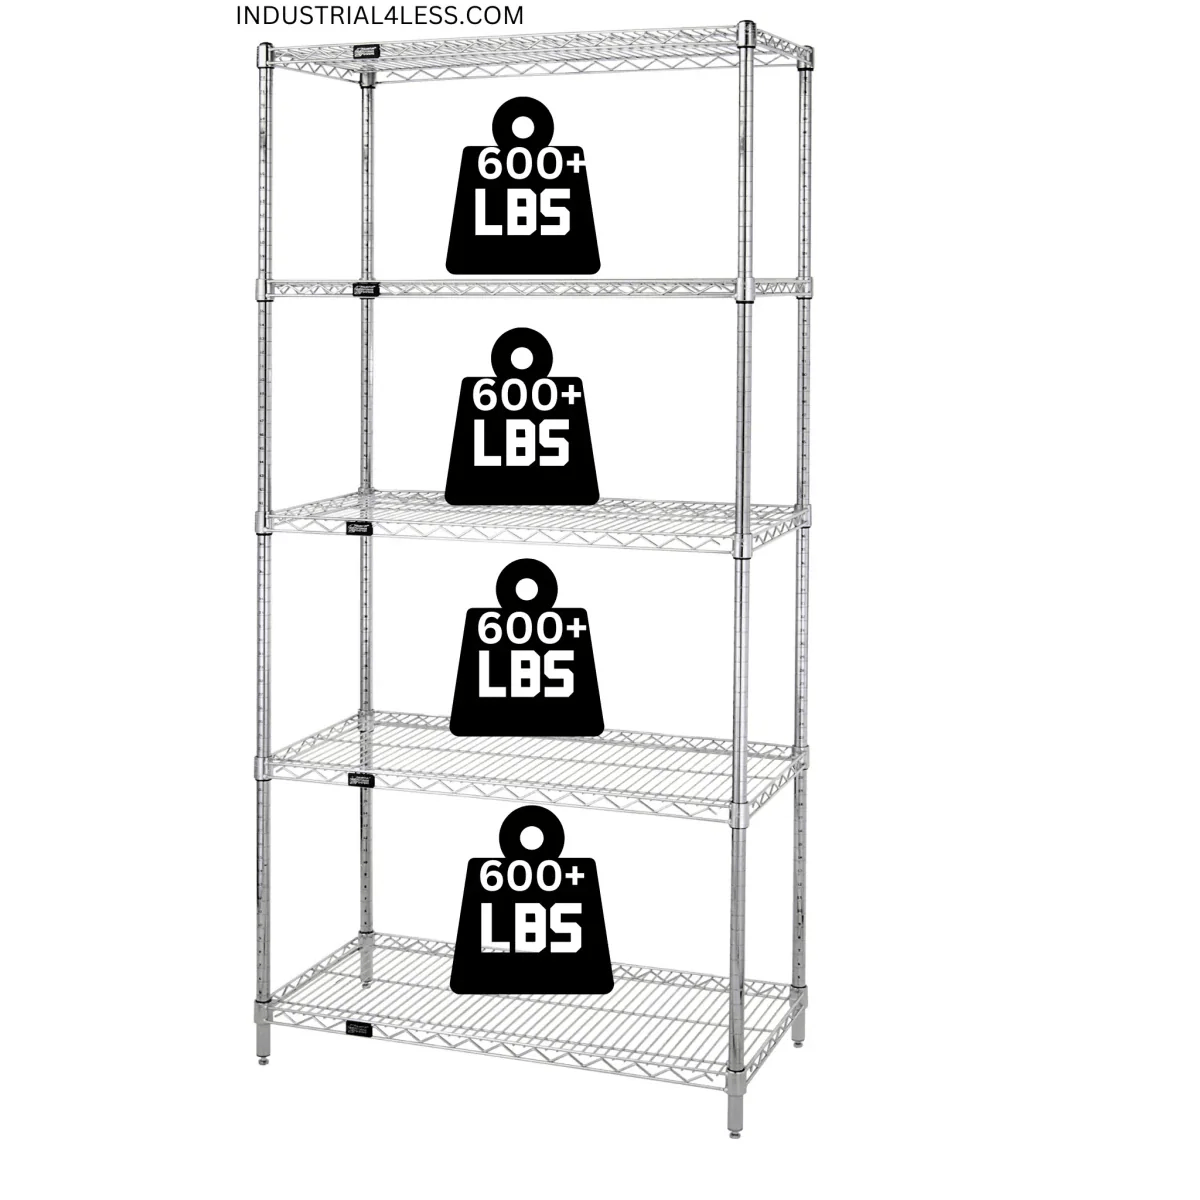 36" x 48" Stainless Steel Wire Shelving Unit - Industrial 4 Less - 36485S-5